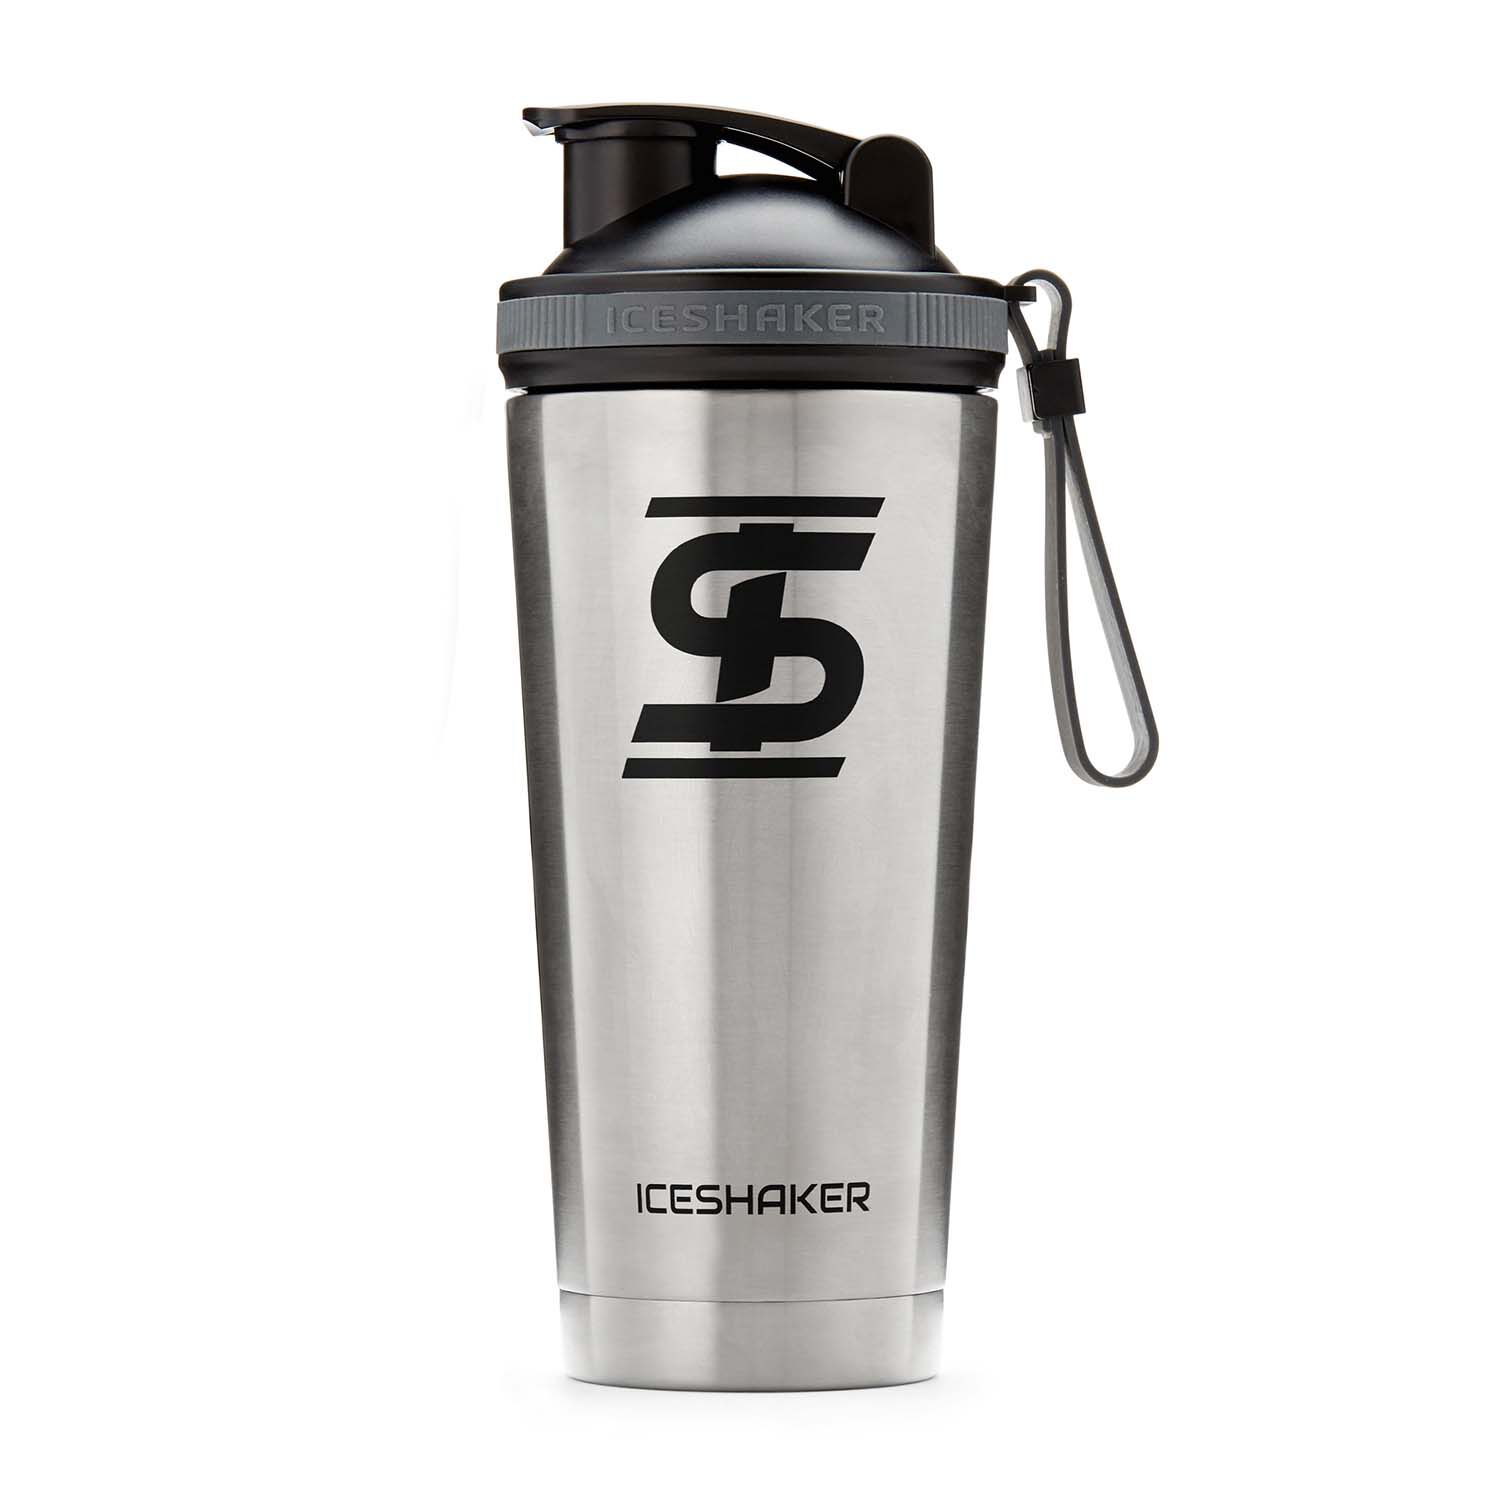 Ghost's latest Shaker Of The Month entry is a white stainless steel bottle